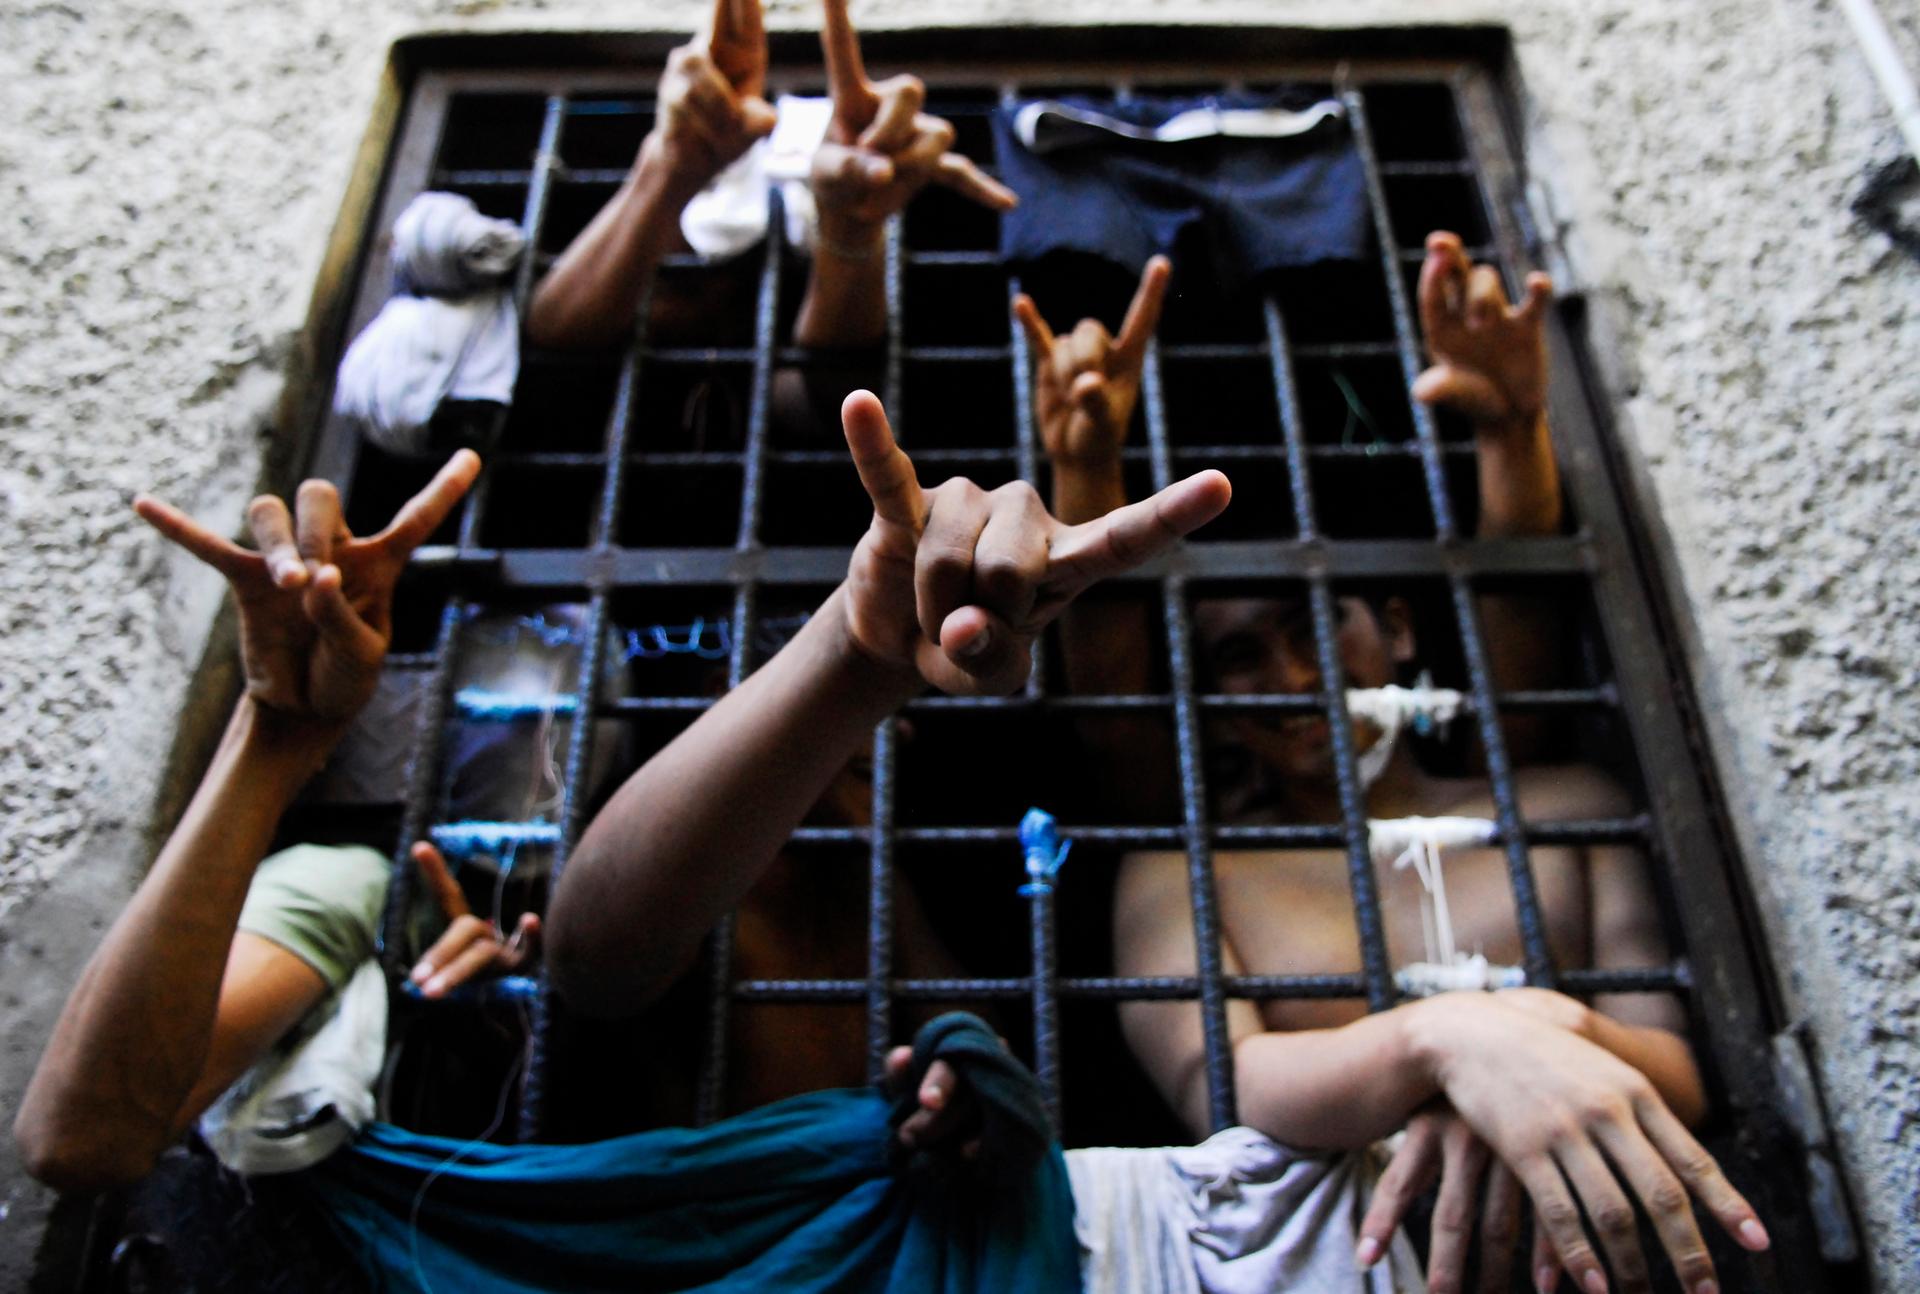 Prisoners flash the MS-13 Mara Salvatrucha street gang hand sign from inside a jail cell at a police station in San Salvador.